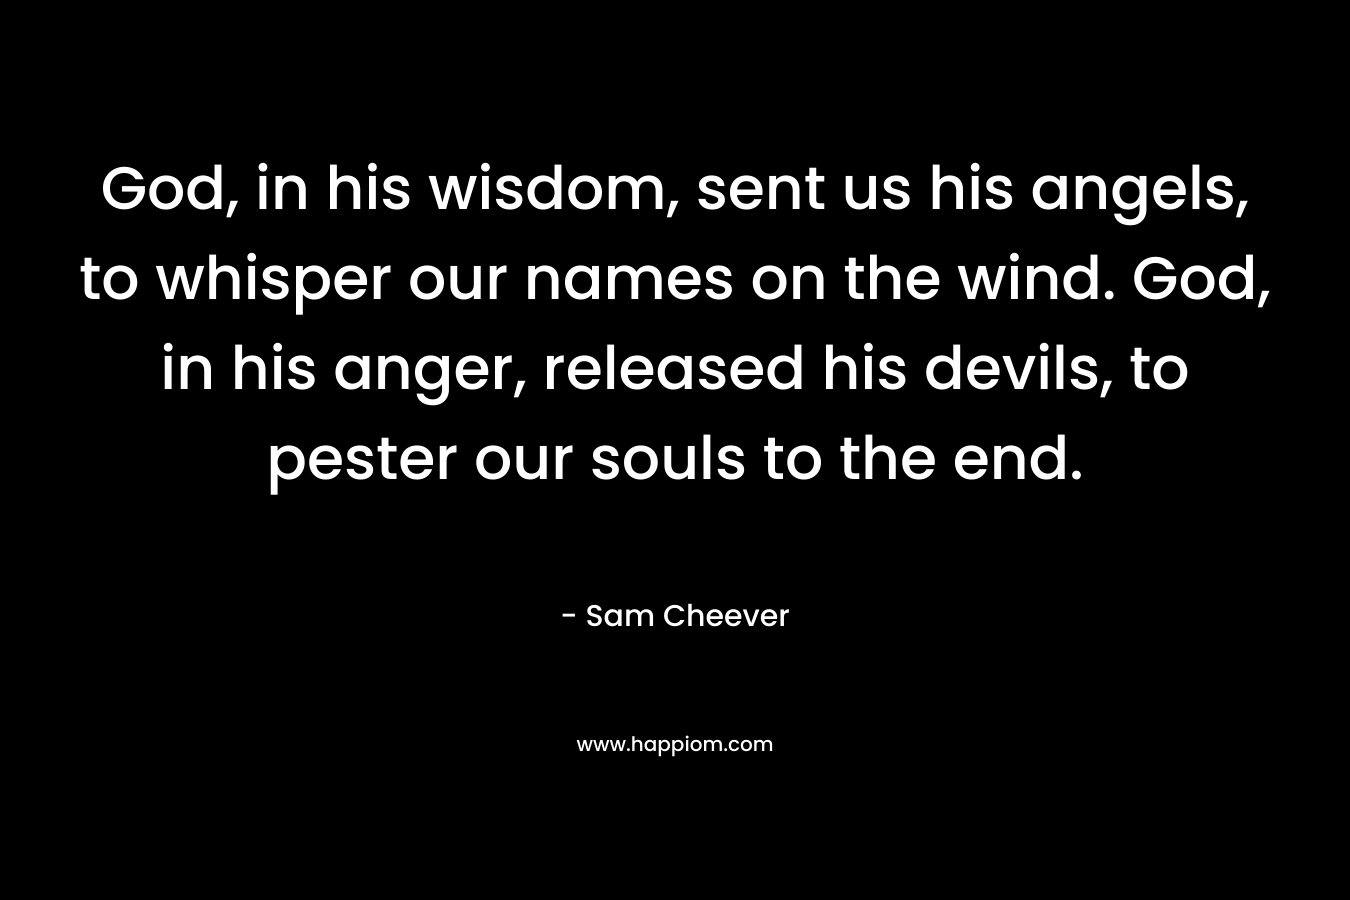 God, in his wisdom, sent us his angels, to whisper our names on the wind. God, in his anger, released his devils, to pester our souls to the end. – Sam Cheever